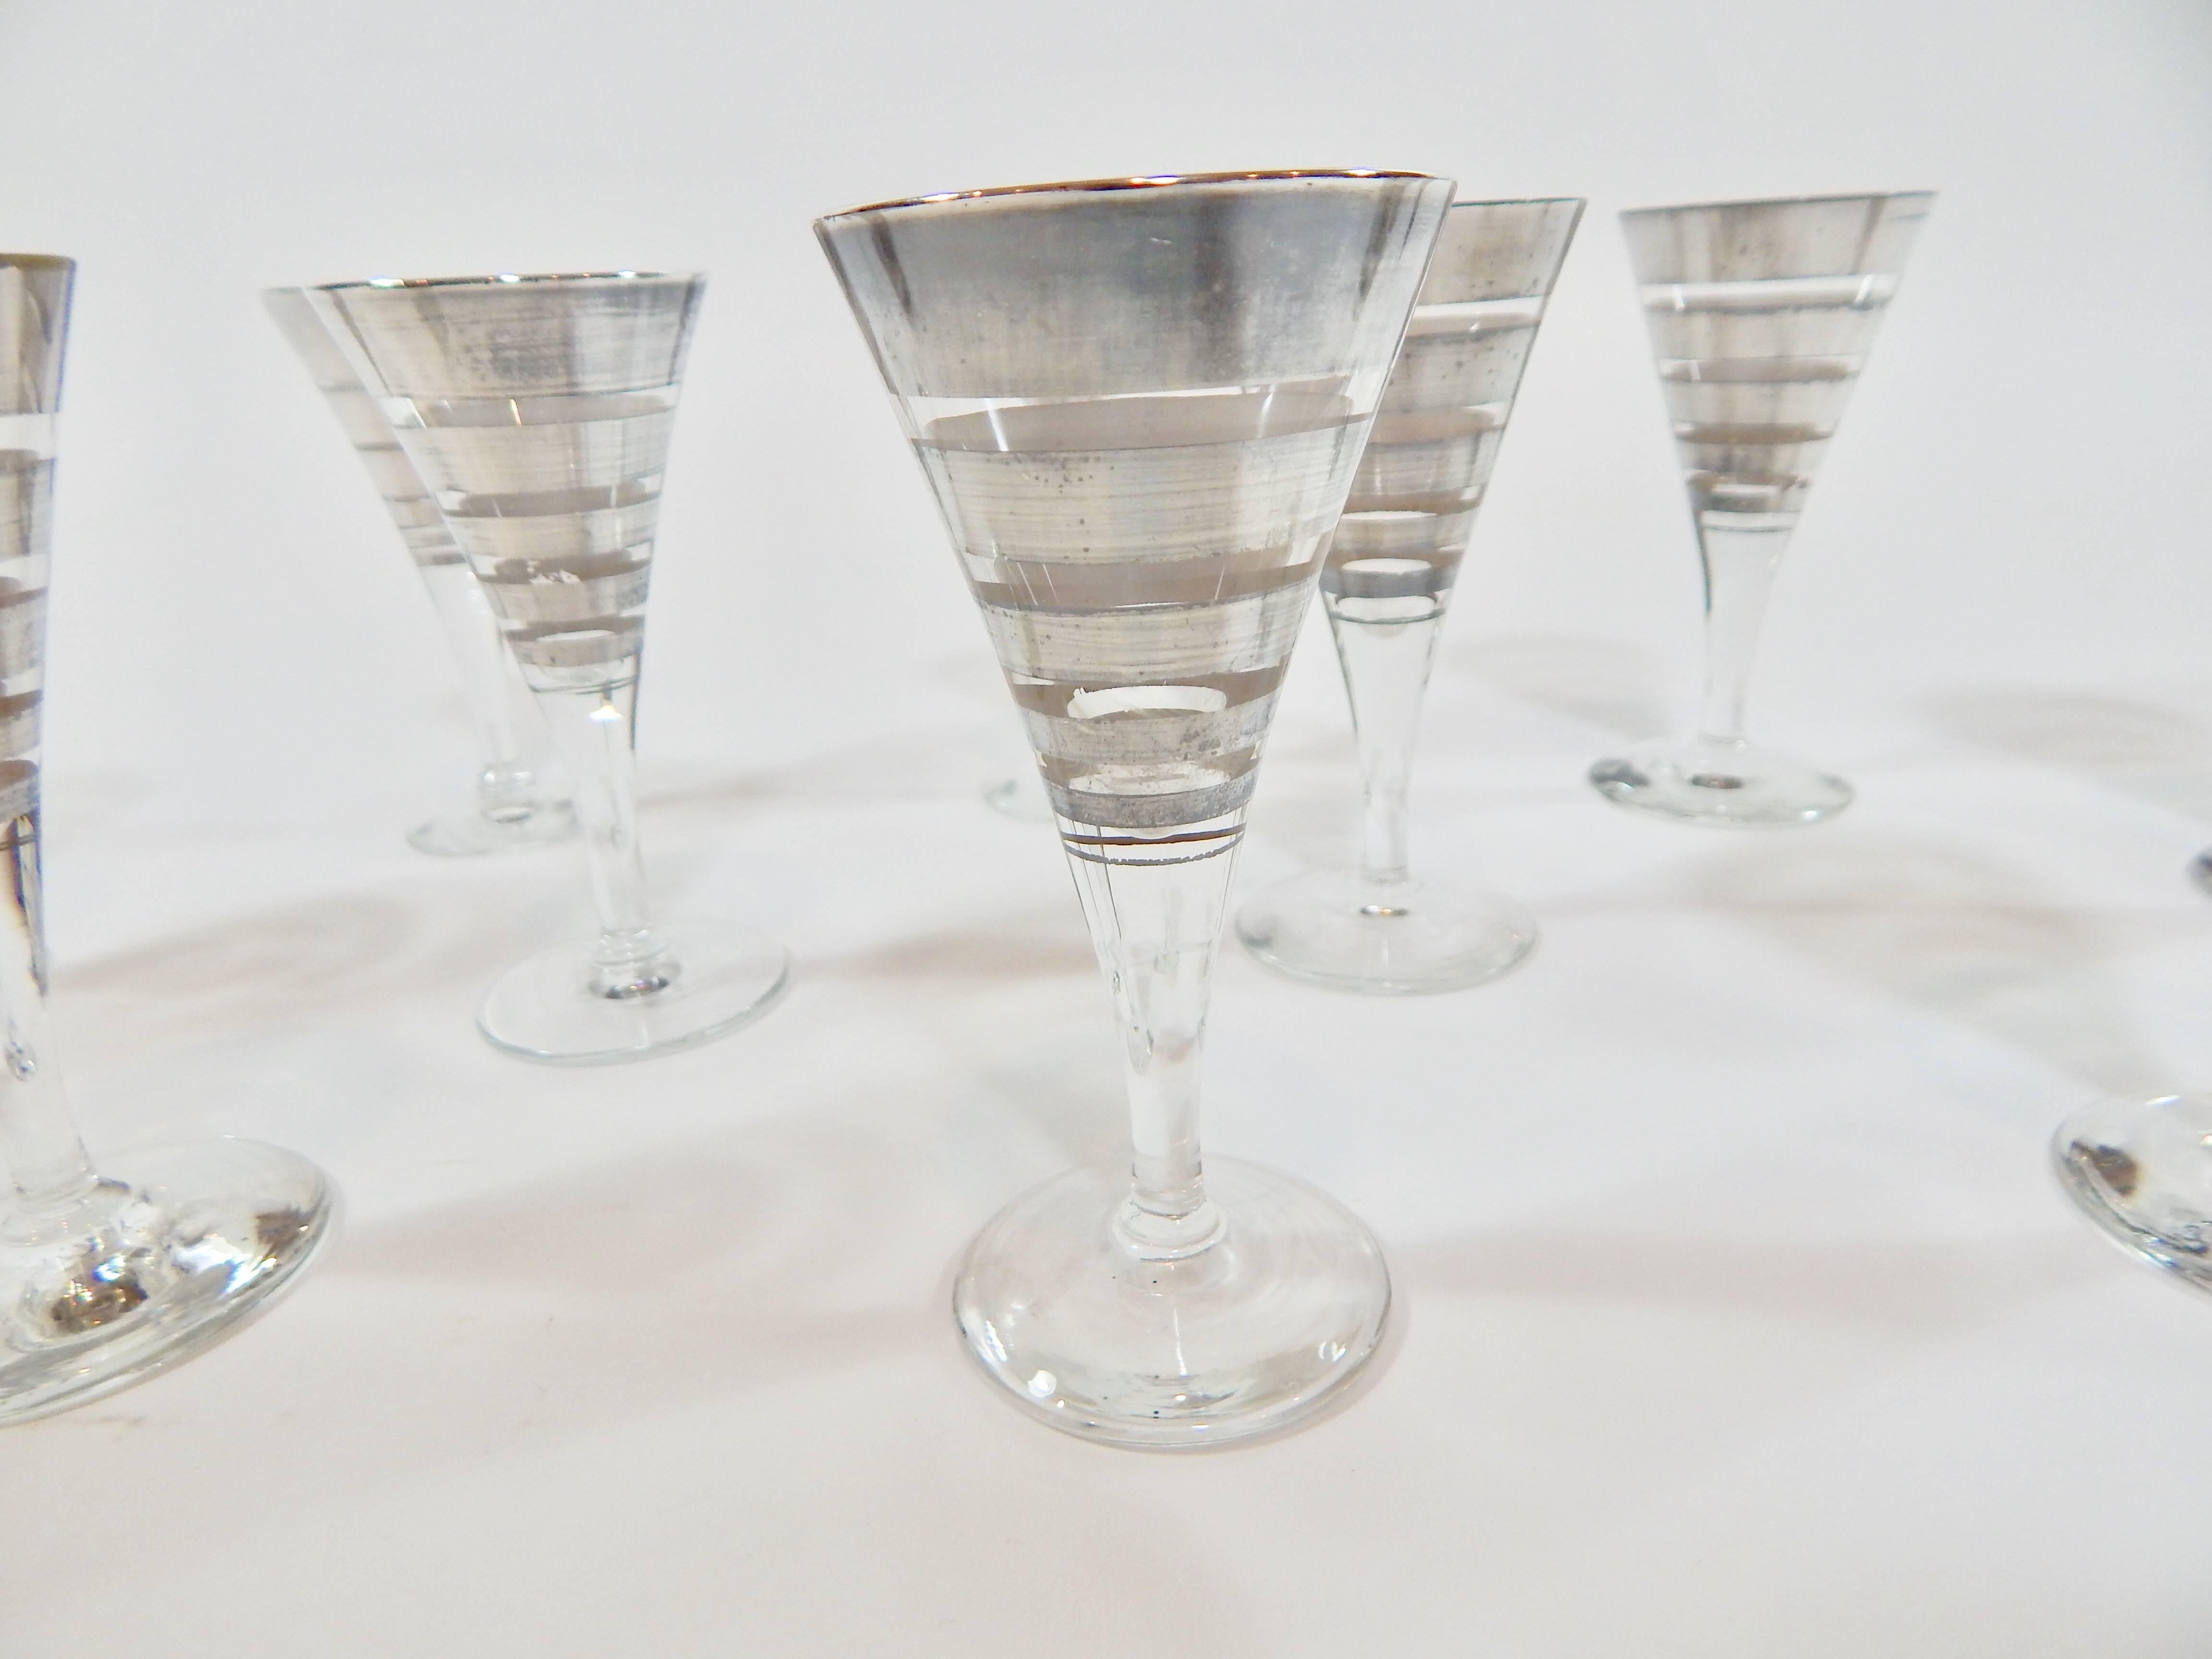 Authentic 1950s Mid-Century set of ten Dorothy Thorpe cordial glasses or cocktail flutes with stem. Rare design. All marked and signed with signature T on bottom. Perfect addition to any bar or table setting. Glass in excellent condition. Exhibits